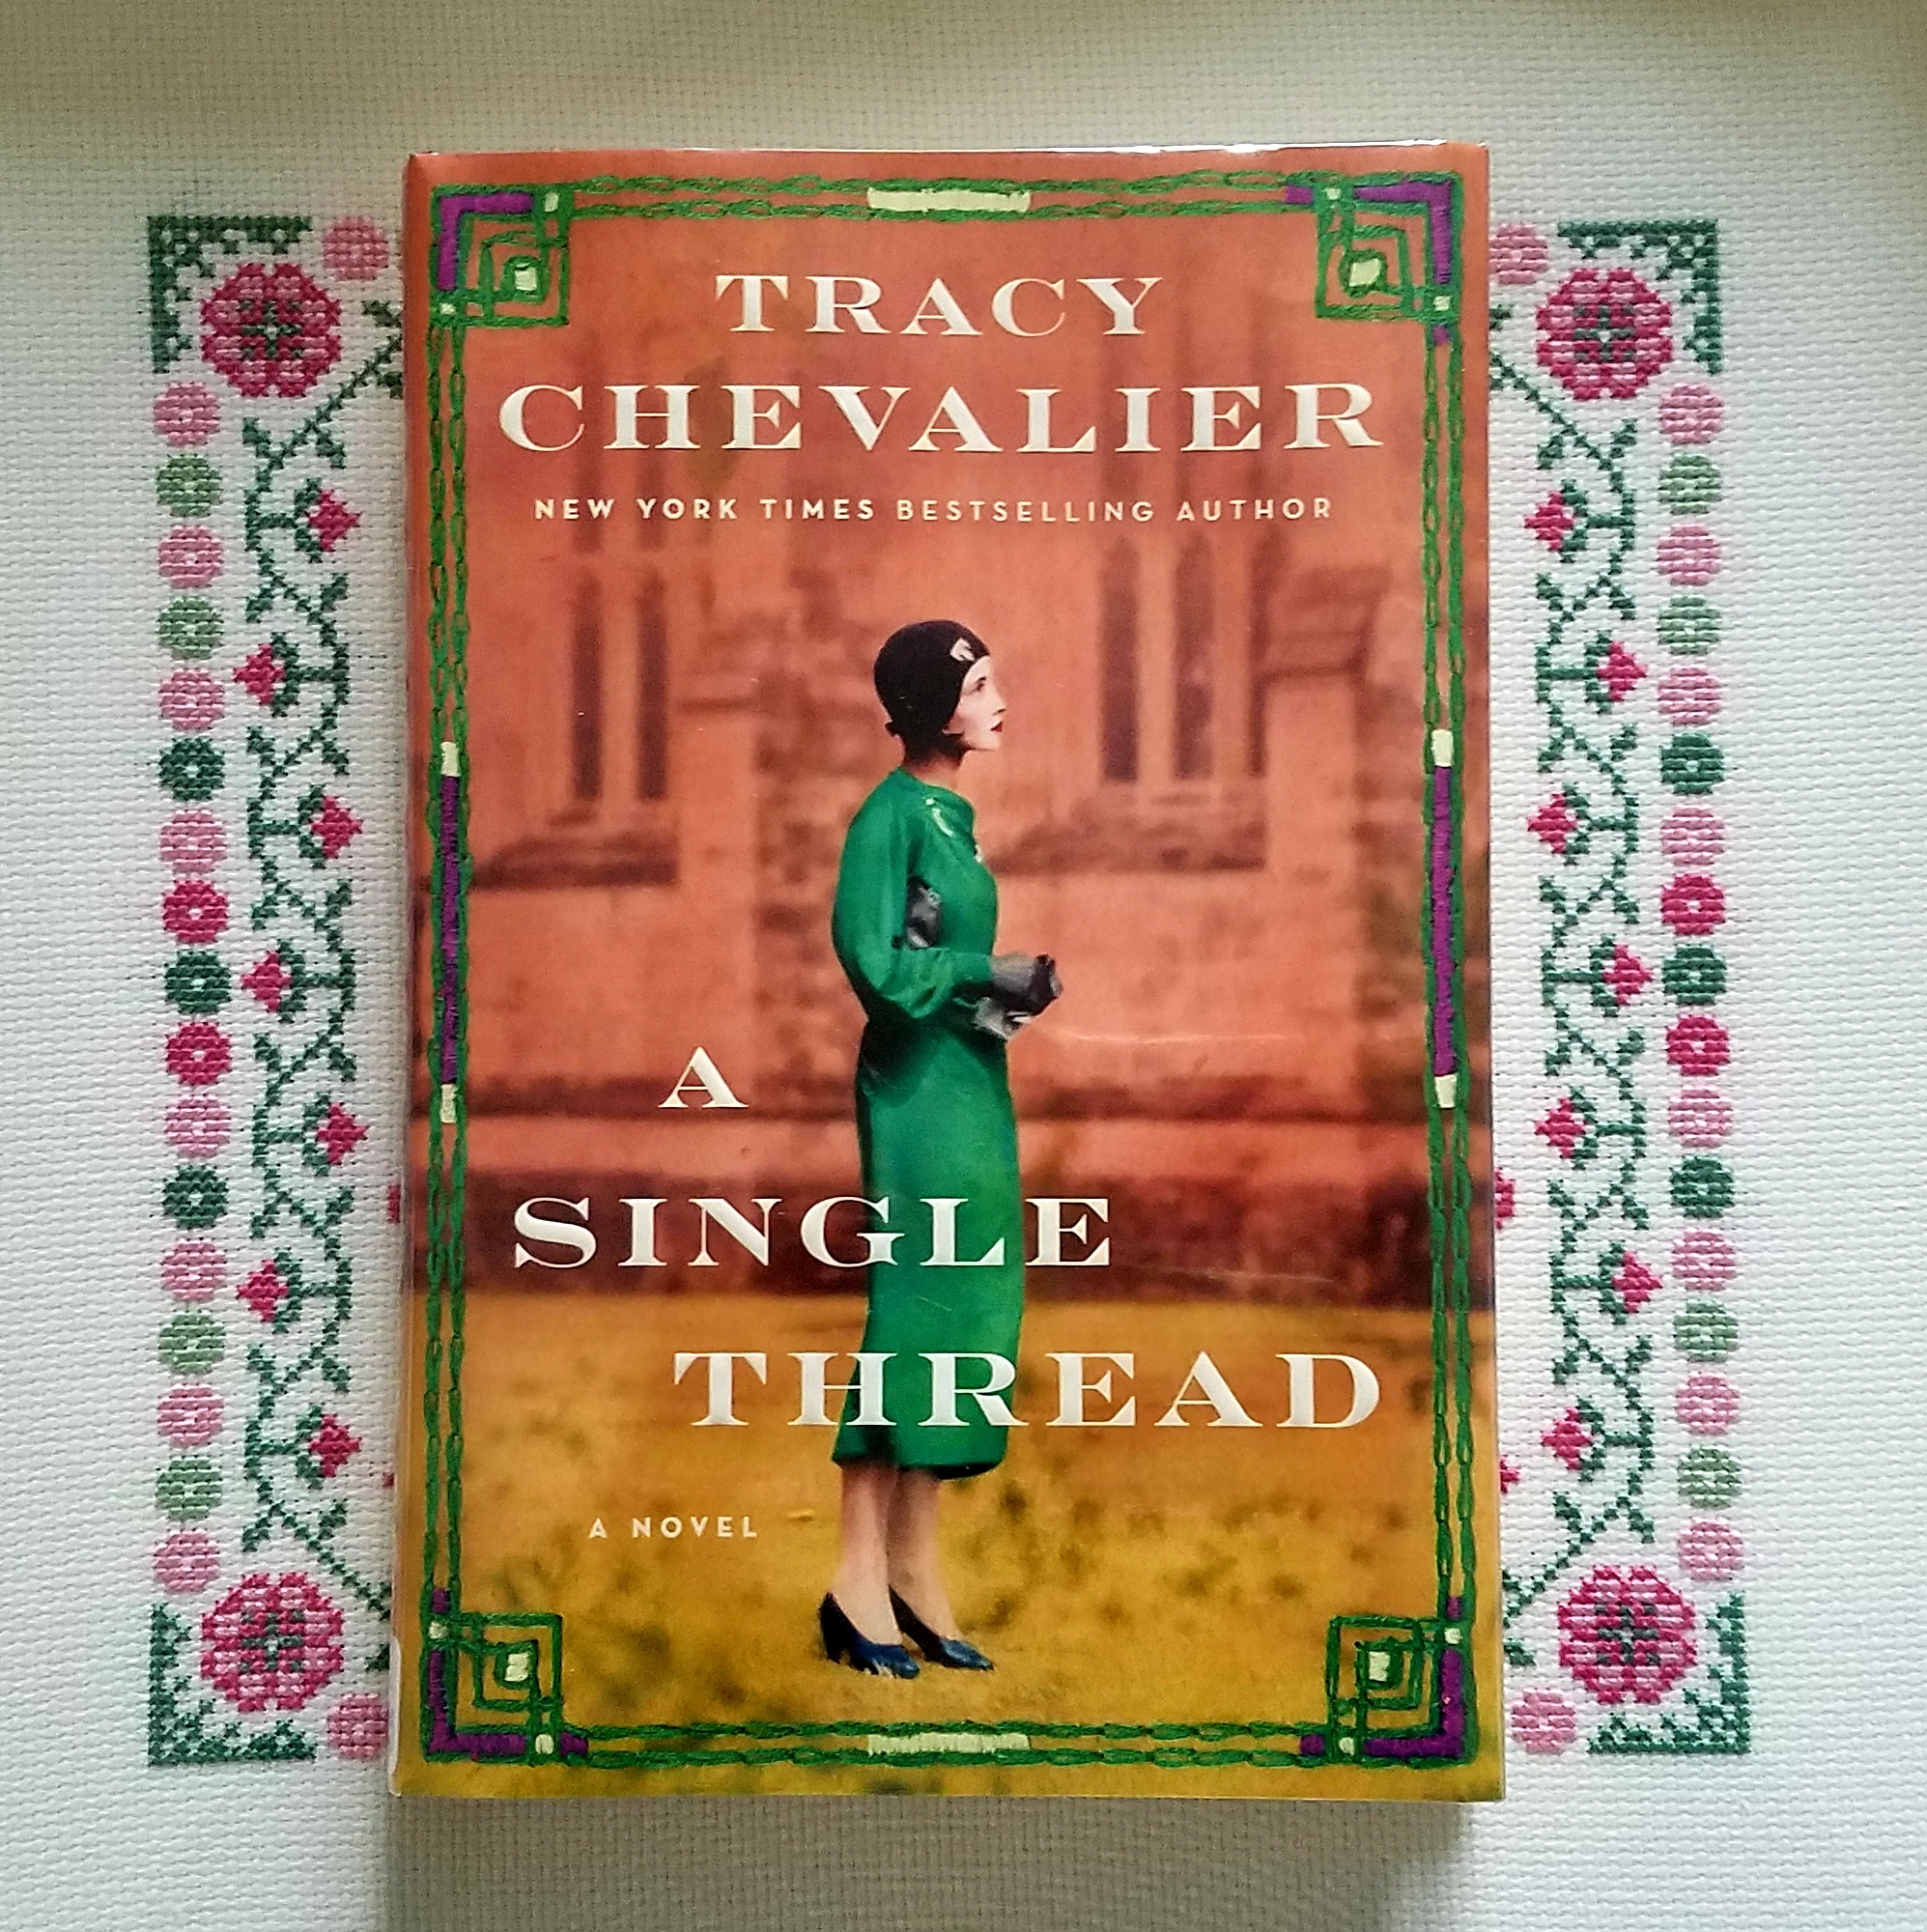 Book Review of A SINGLE THREAD